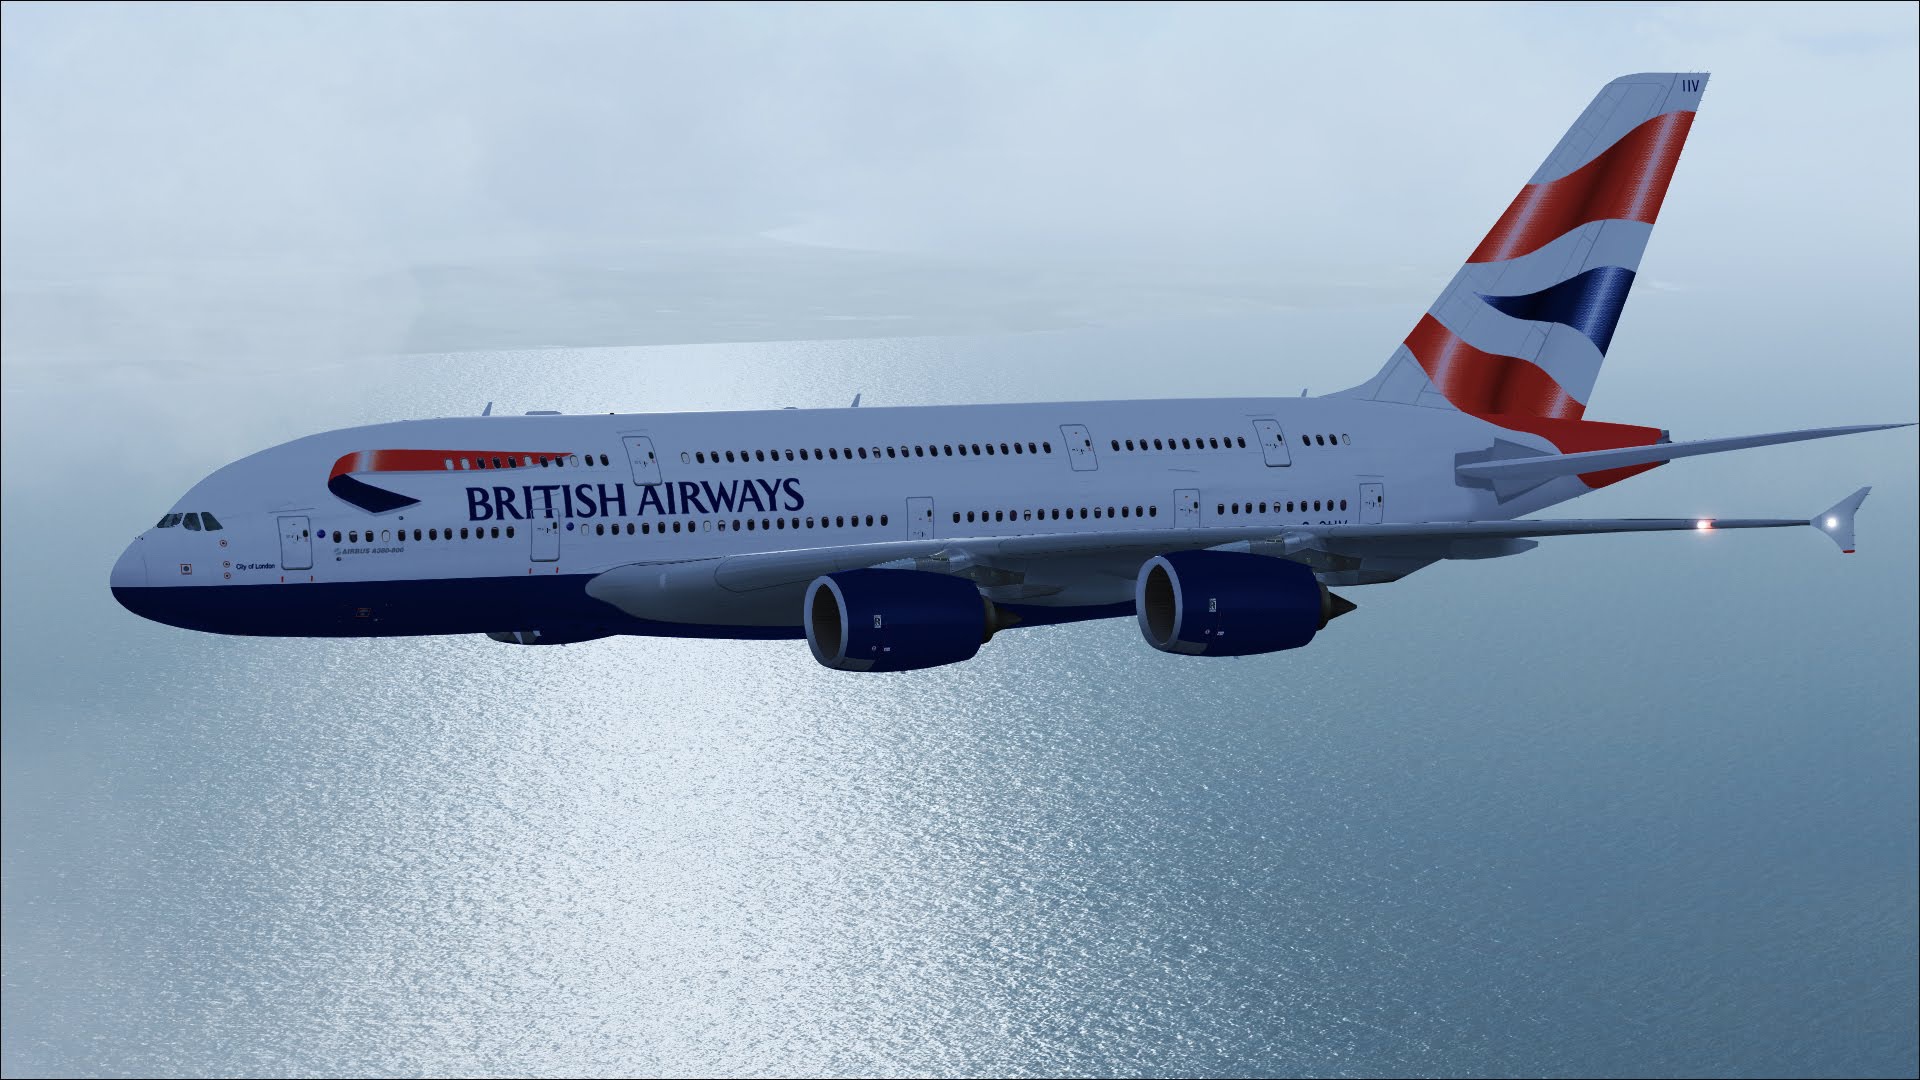 Airbus A380 British Airways plane flying over the ocean